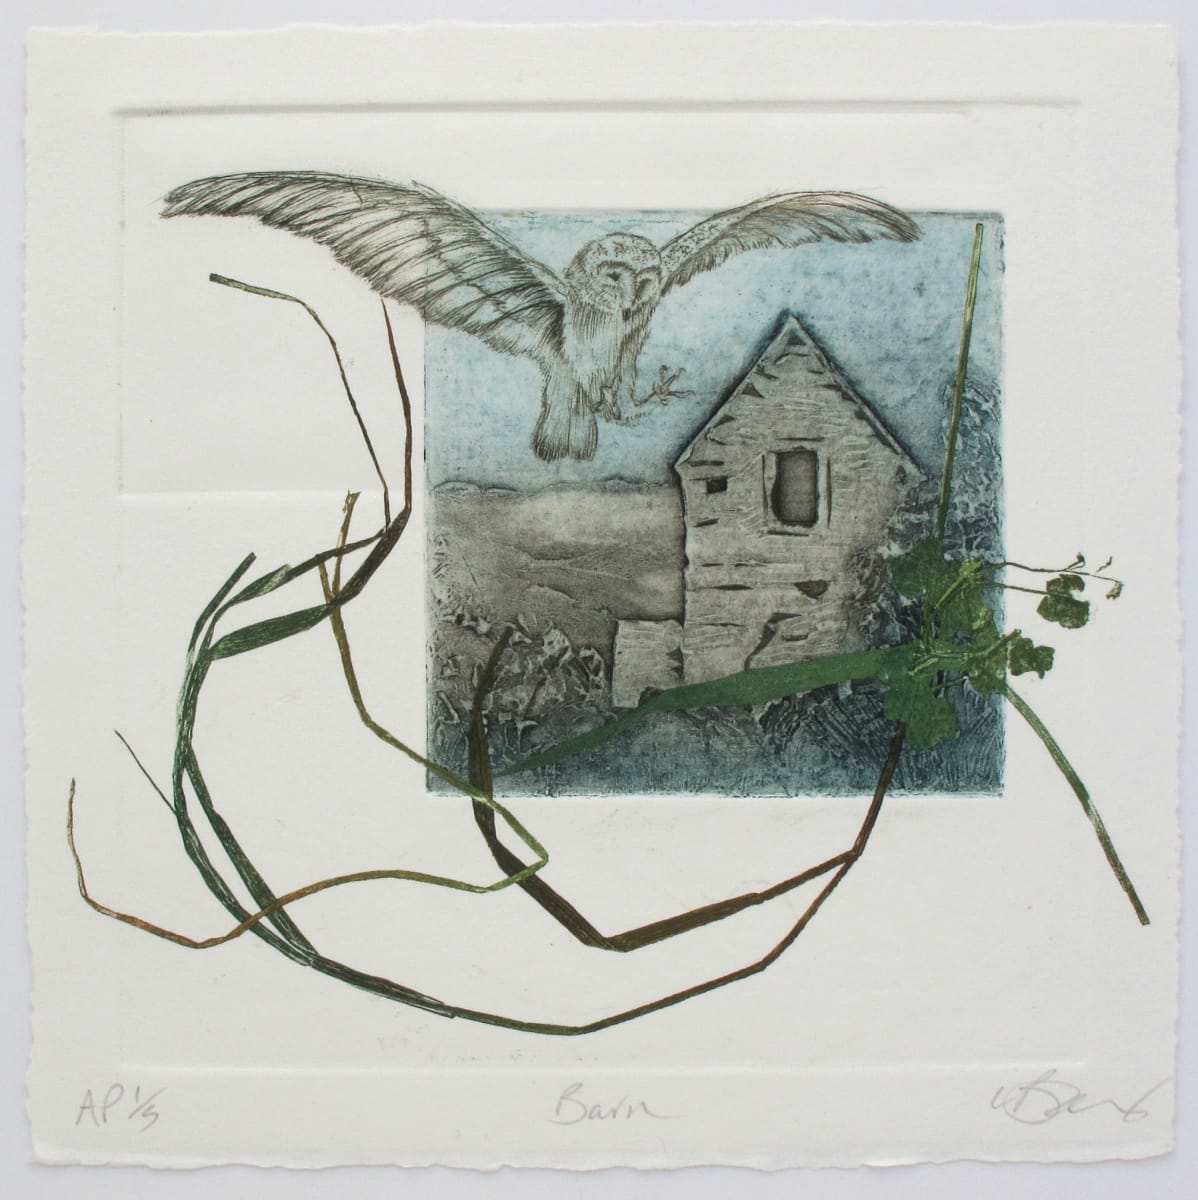 Barn 1/5 AP  Image: One of 5 AP after 20:20 print exchange.
Collagraph, drypoint and monoprint. 
On Somerset paper